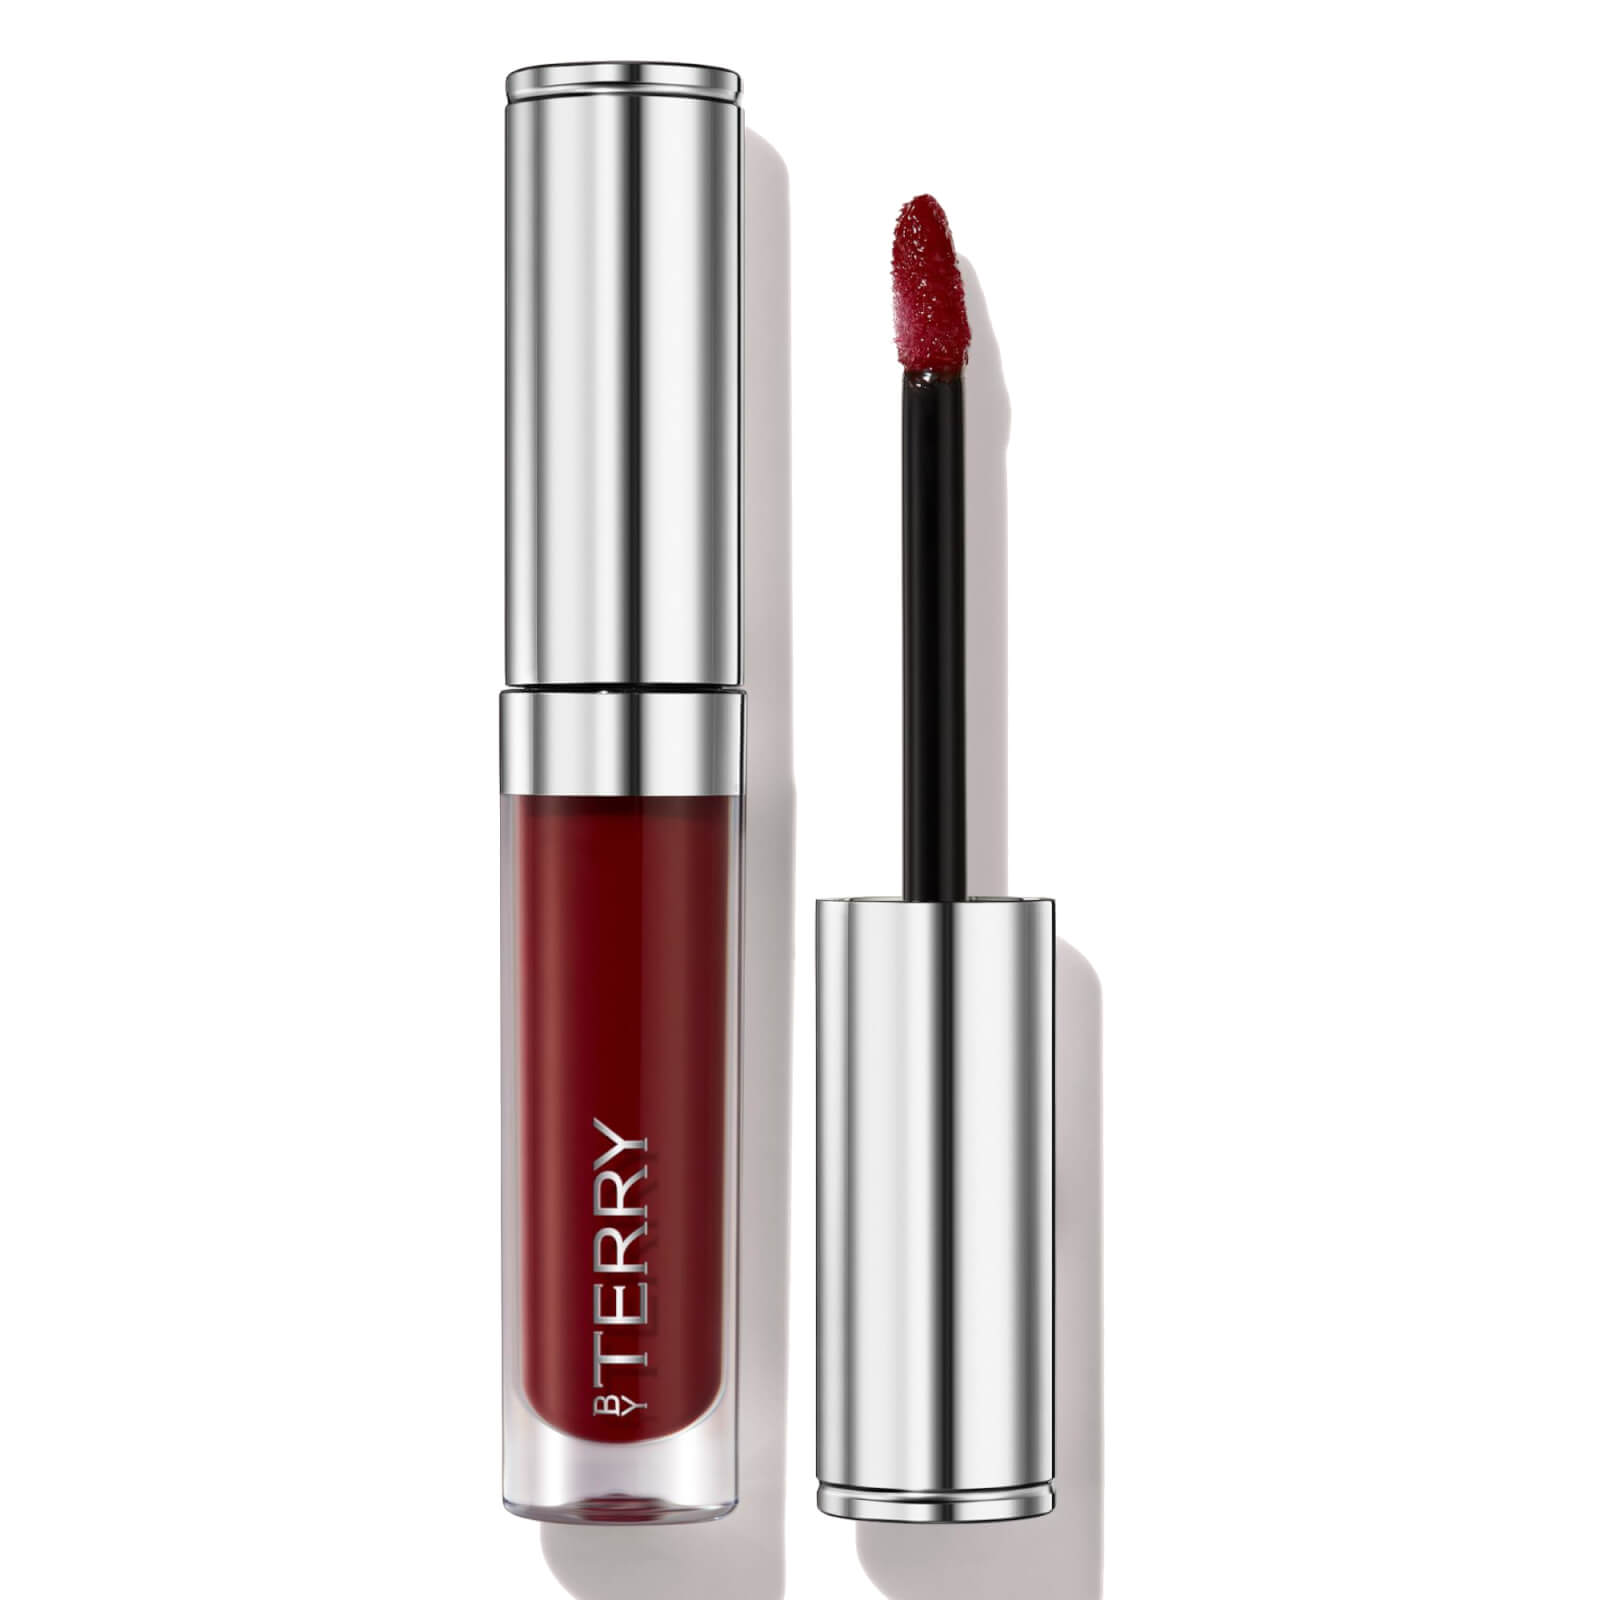 Shop By Terry Baume De Rose Tinted Lip Care (various Shades) - 1. Cherry-chérie